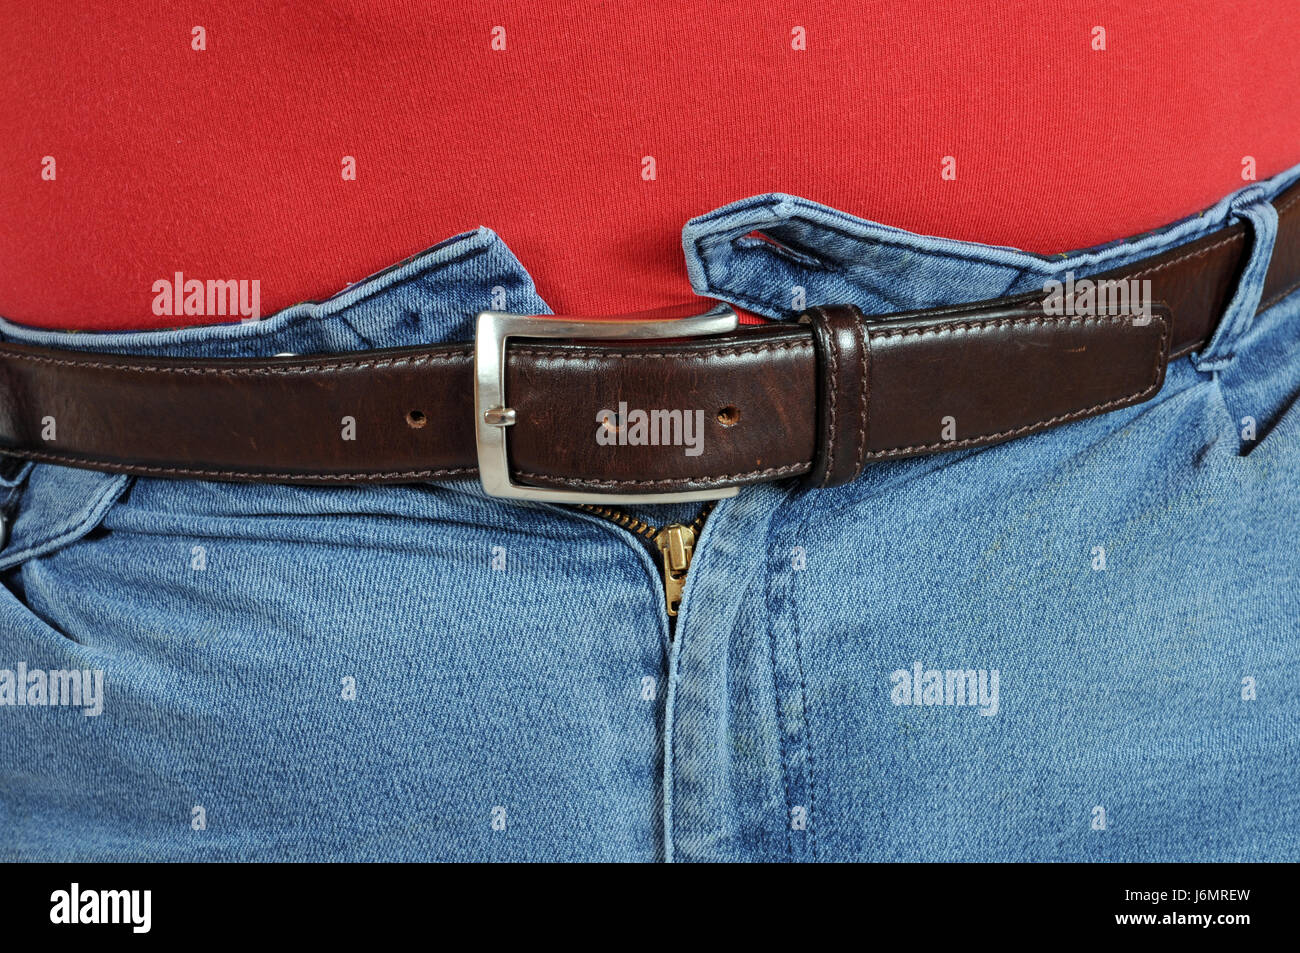 Man Skinny Jeans Not Boy Not Woman High Resolution Stock Photography and  Images - Alamy